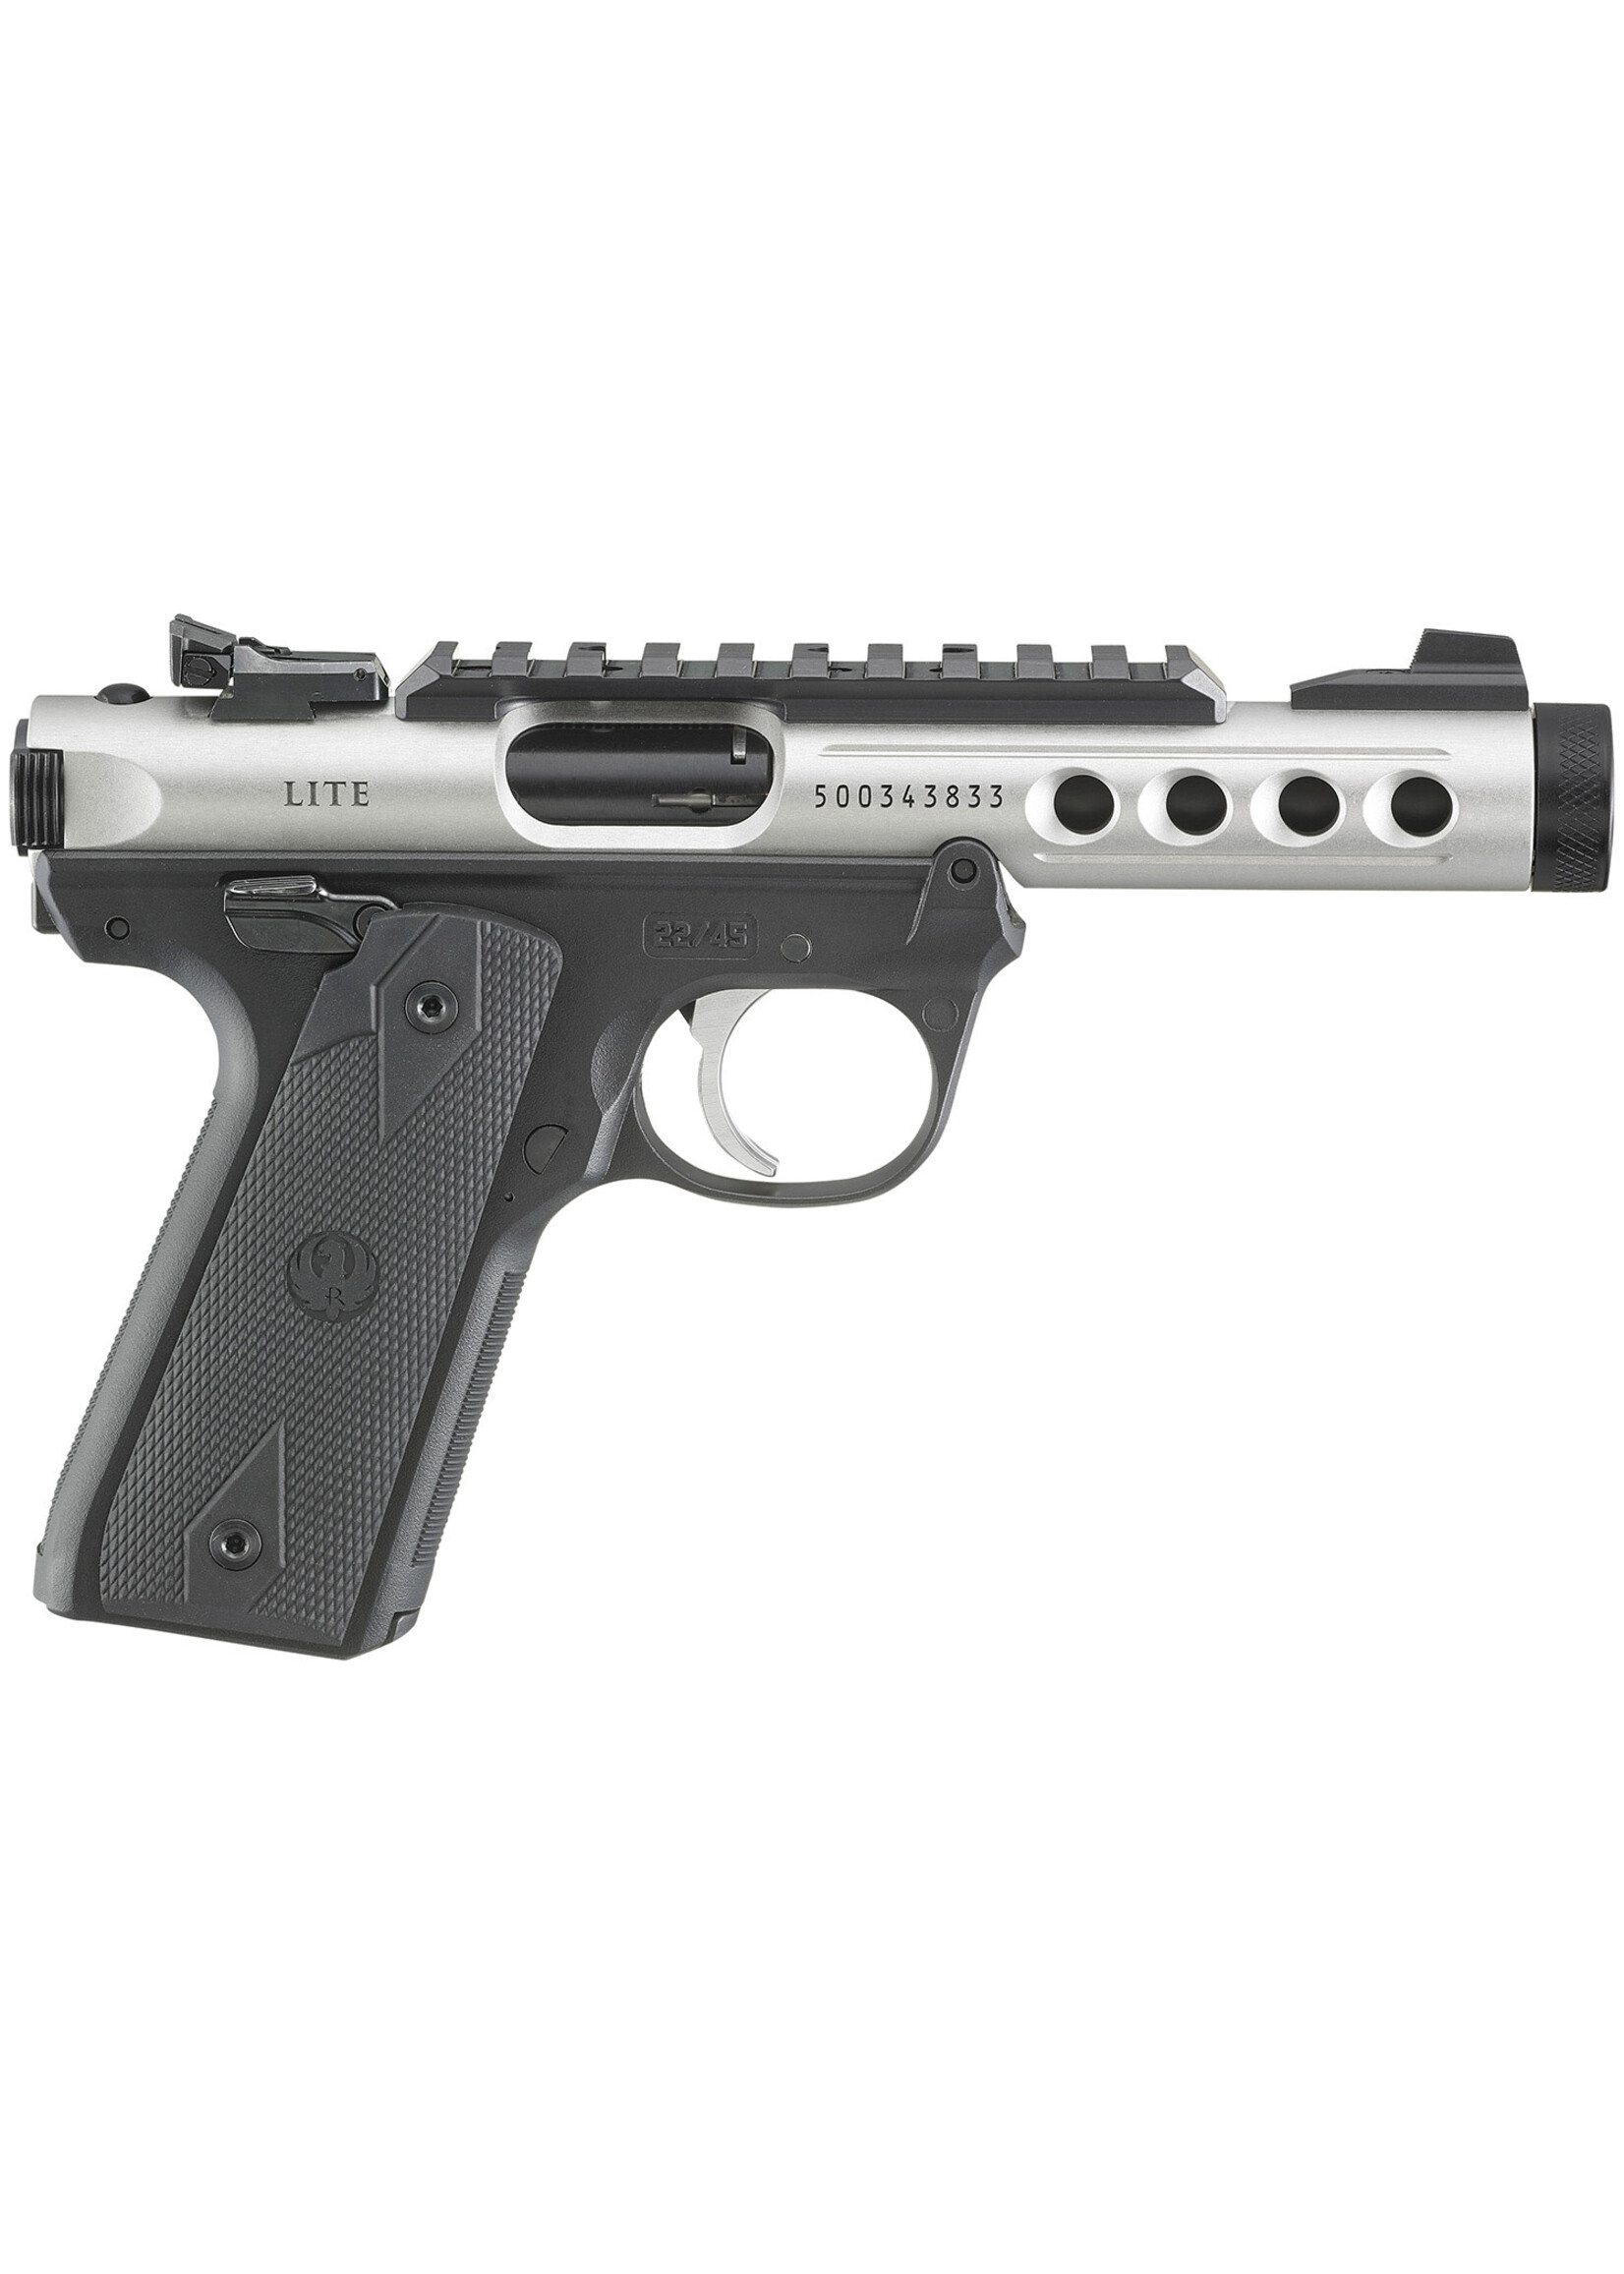 Ruger Ruger 43945 Mark IV 22/45 Lite 22 LR 10+1 4.40" Satin Stainless Steel/Threaded Barrel, Clear Anodized Aluminum Slide Black Black Polymer Ventilated Aluminum w/Picatinny Rail Receiver Checkered 1911-Style Panel Grip